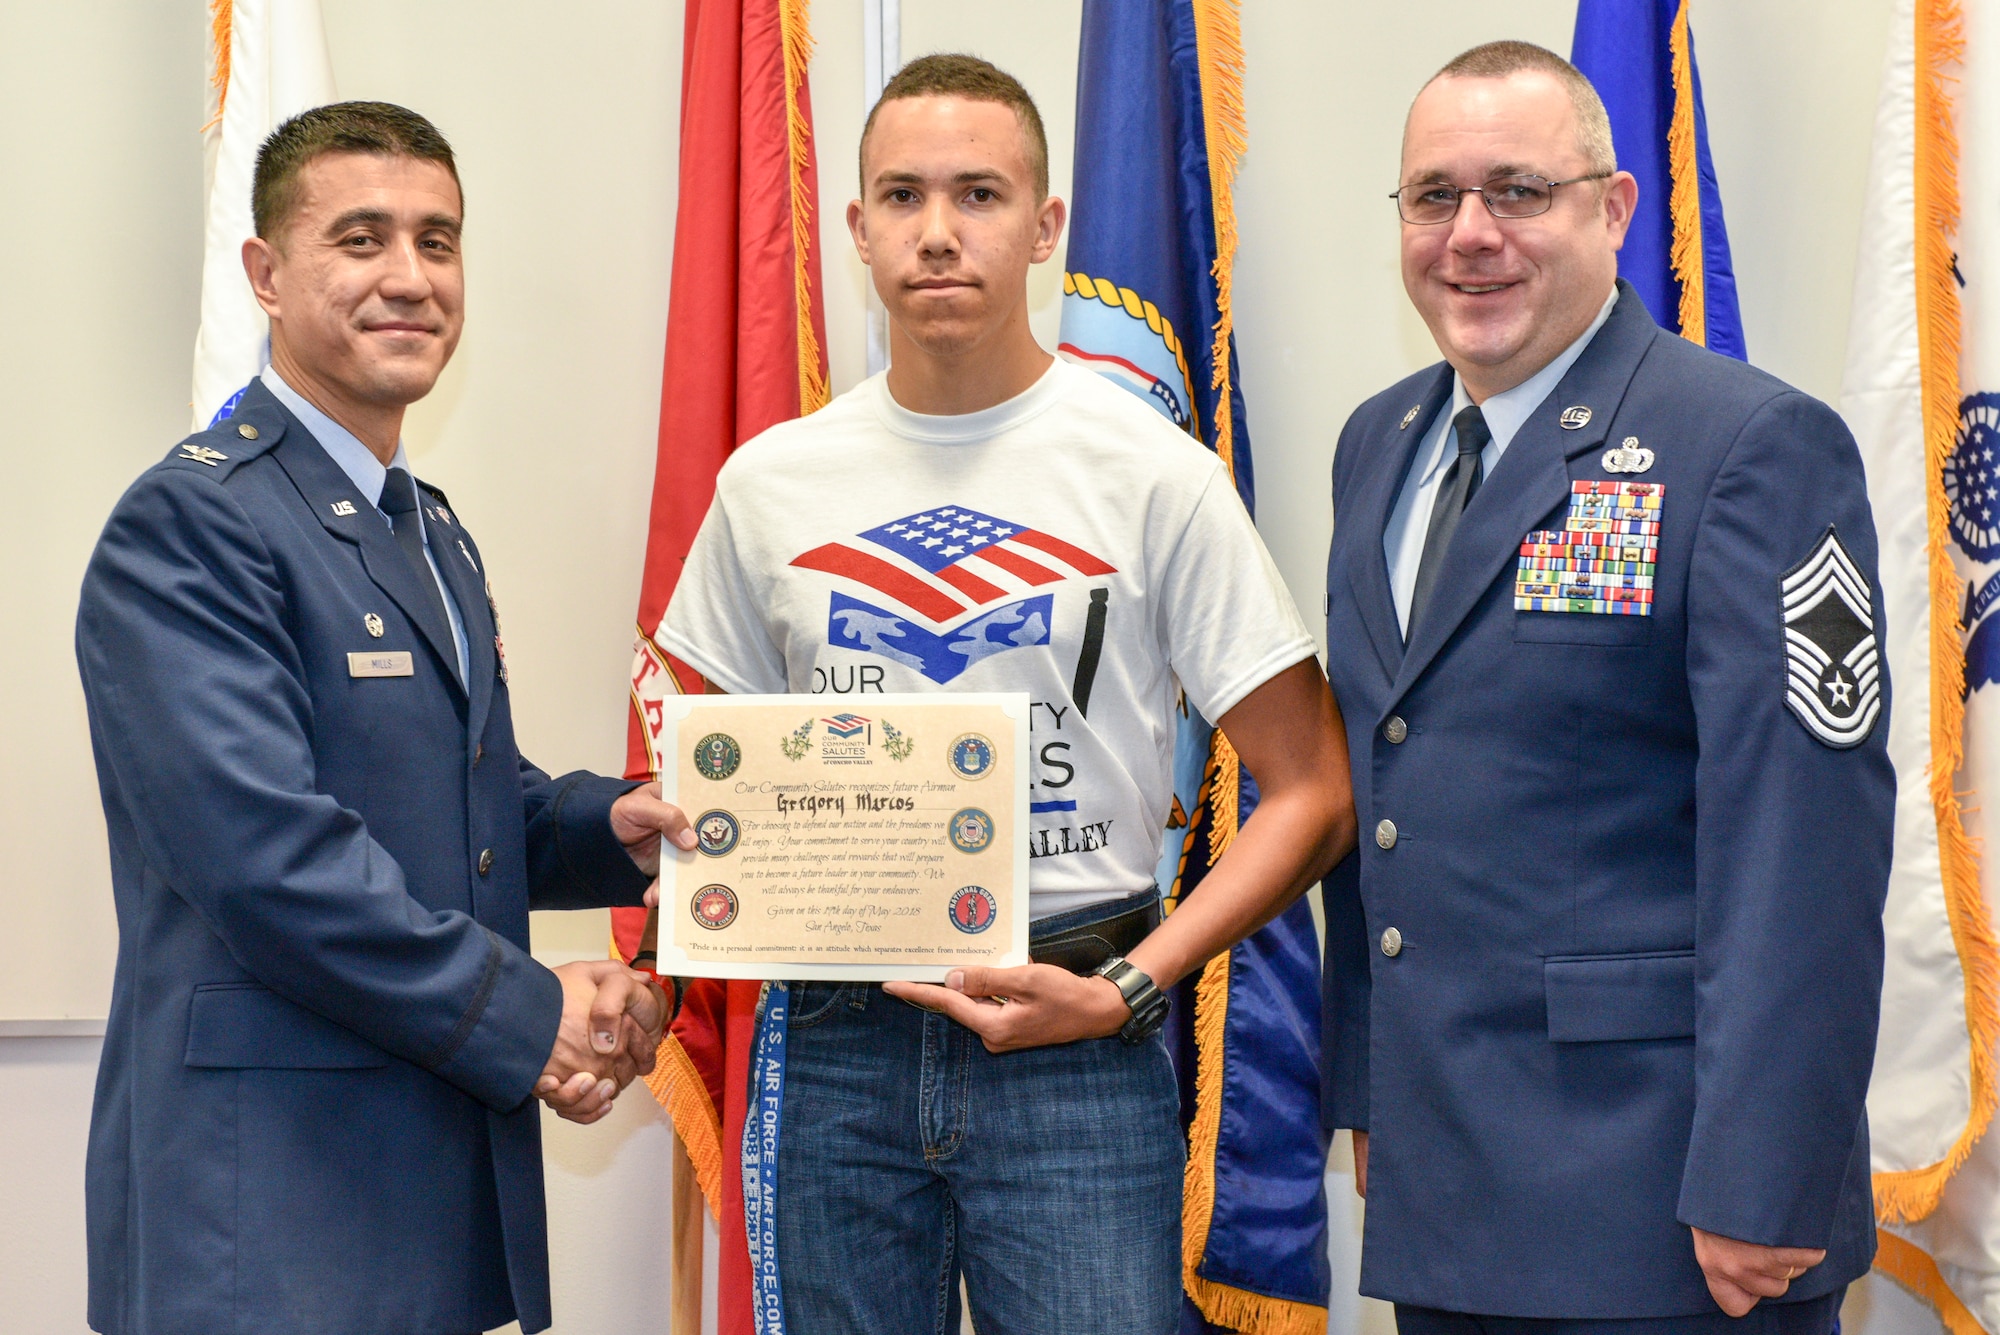 U.S. Air Force Col. Ricky Mills, 17th Training Wing commander, Lakeview graduate Marcos Gregory and Chief Master Sgt. Daniel Stein,  17th Training Wing command chief, pose during the Our Community Salutes ceremony in San Angelo, Texas, May 19, 2018. Gregory was the only enlistee for the Air Force of the 23 participants. (U.S. Air Force photo by Senior Airman Randall Moose/Released)